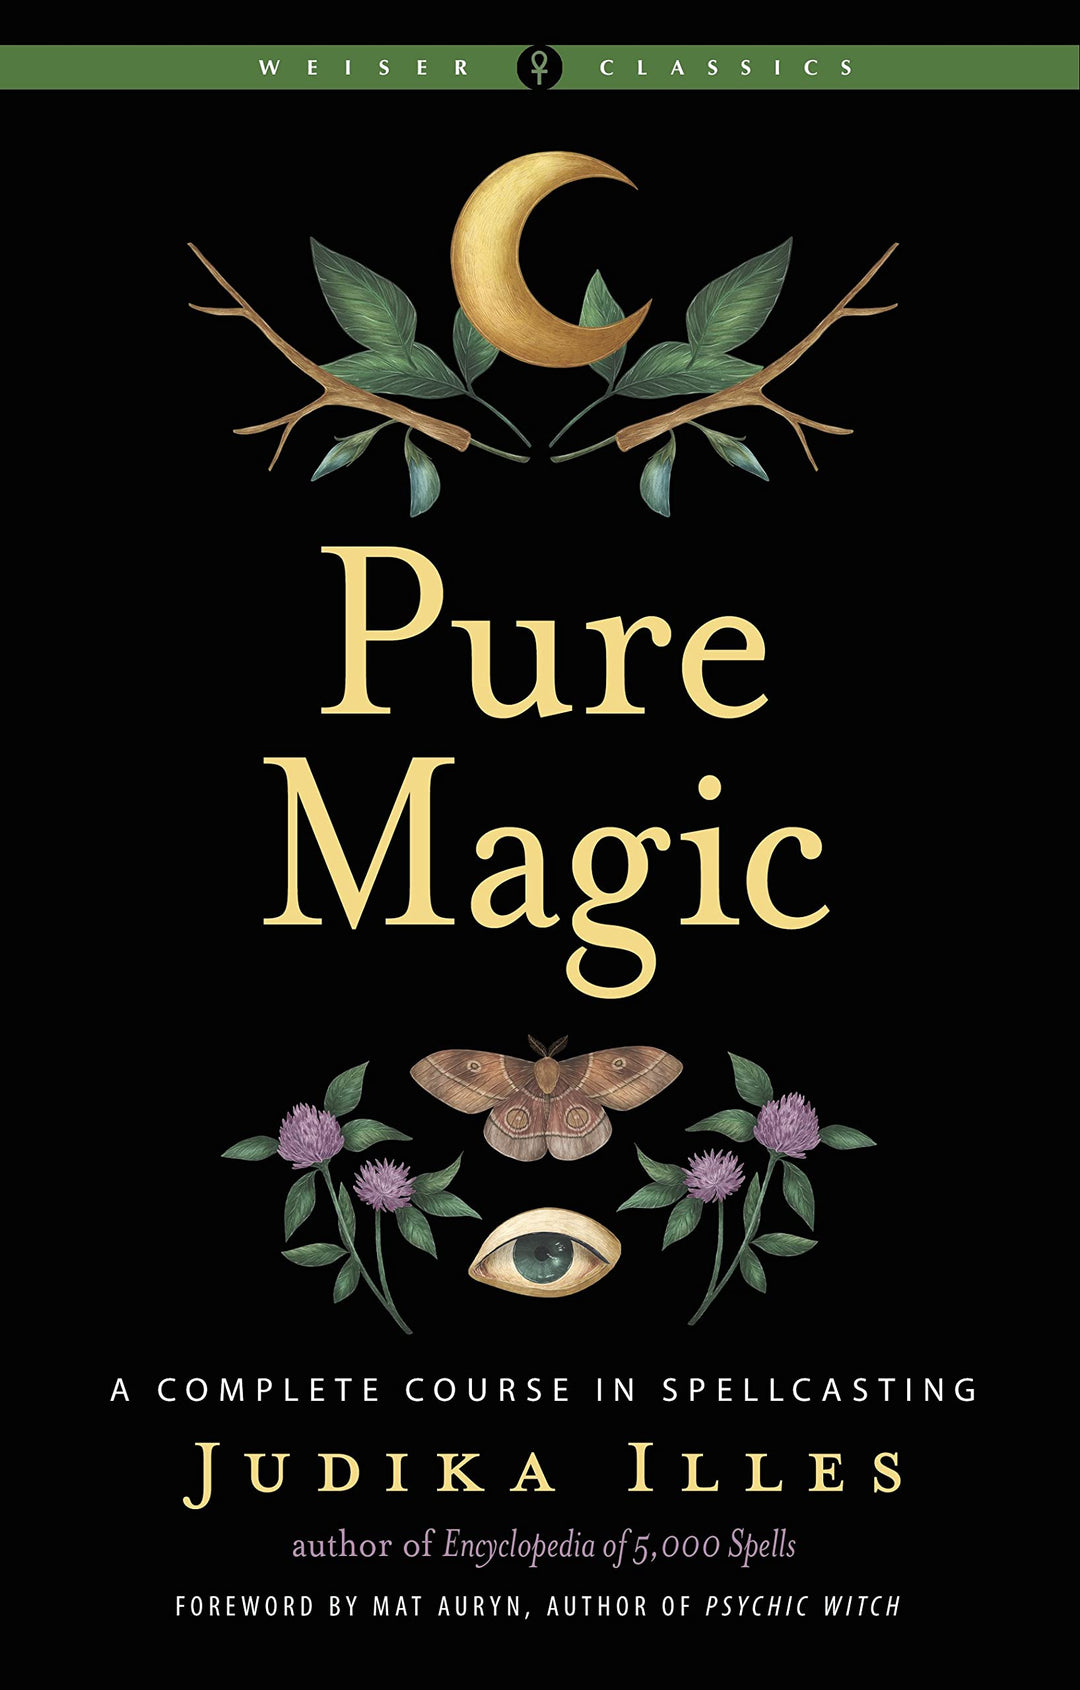 Pure Magic: A Complete Course in Spellcasting (Weiser Classics Series) by Judika Illes